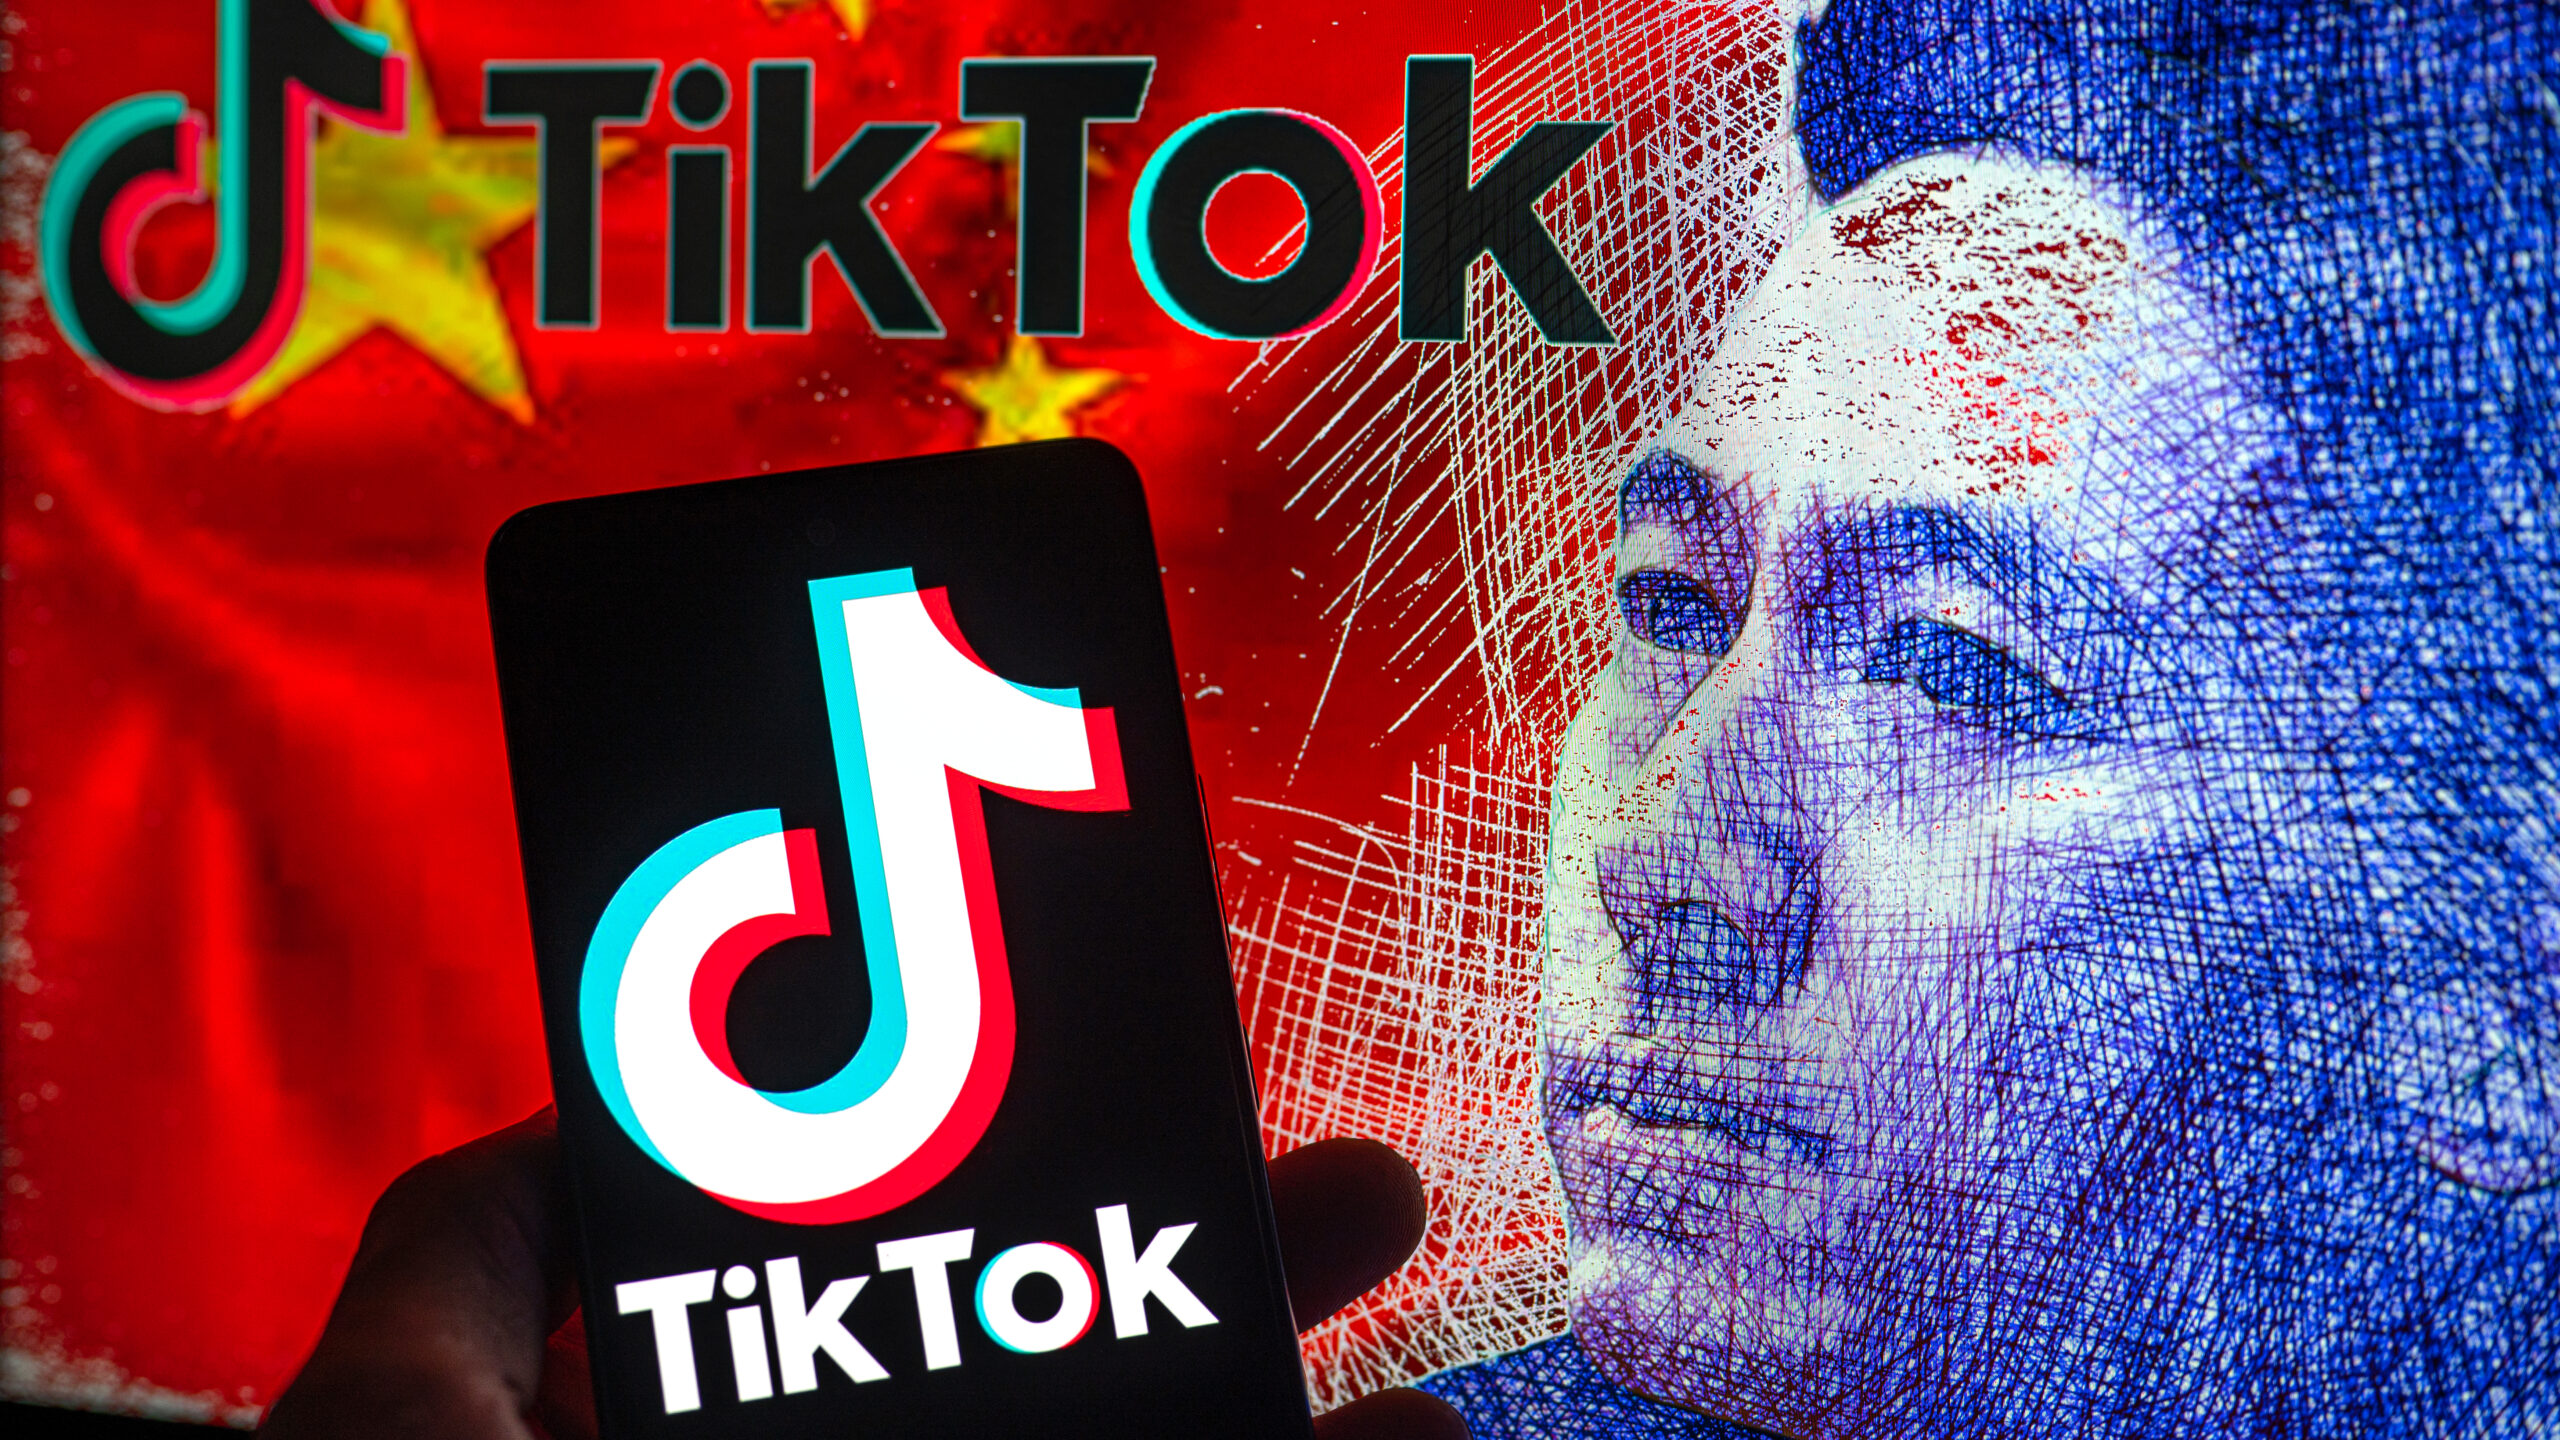 TikTok users outraged as U.S. mandates sale from Chinese owner